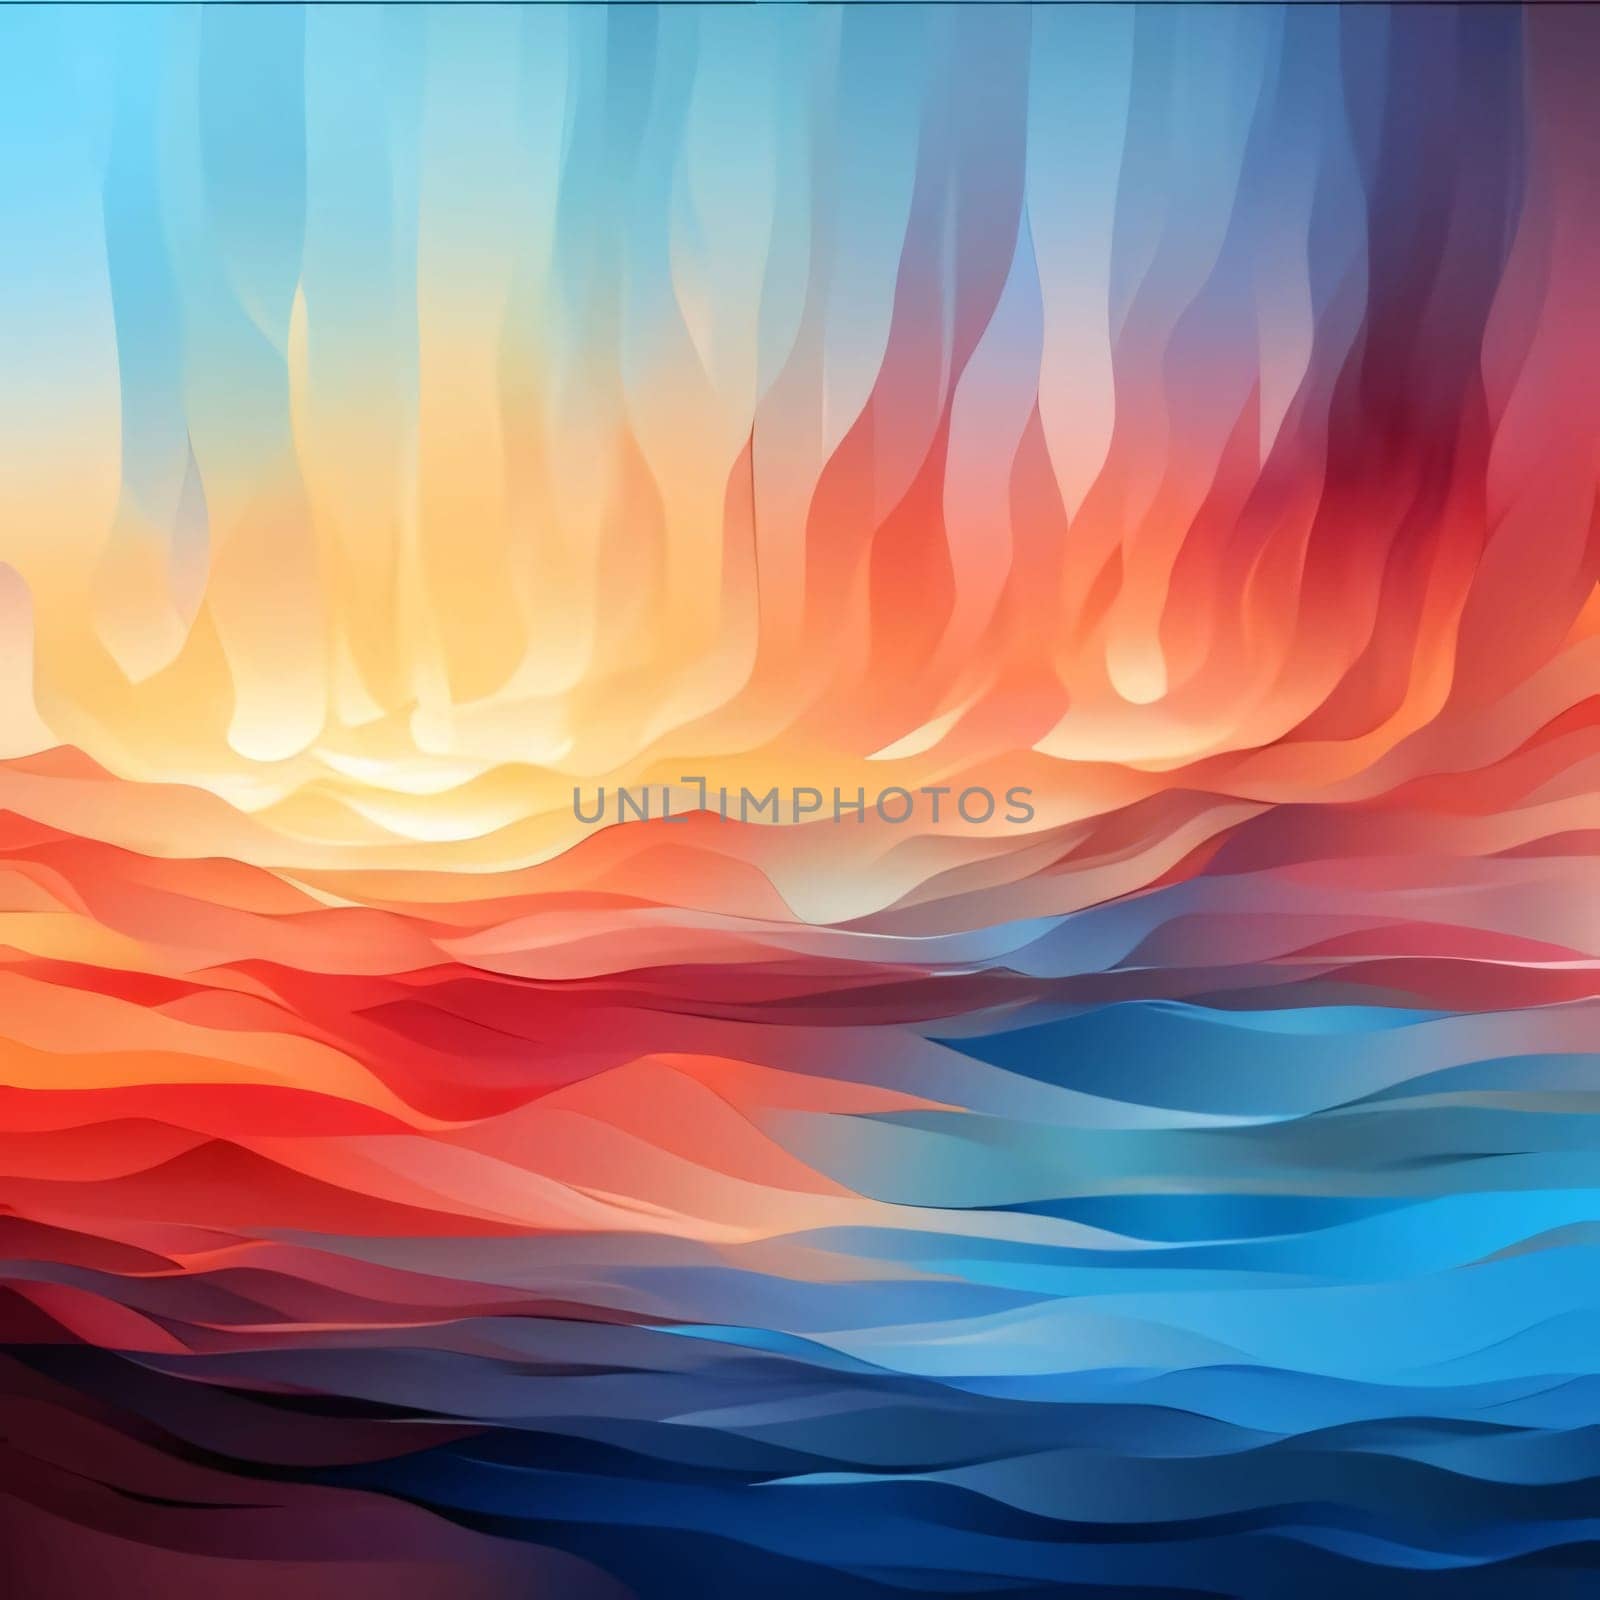 Abstract background design: Abstract blue and orange background with waves. Vector illustration for your design